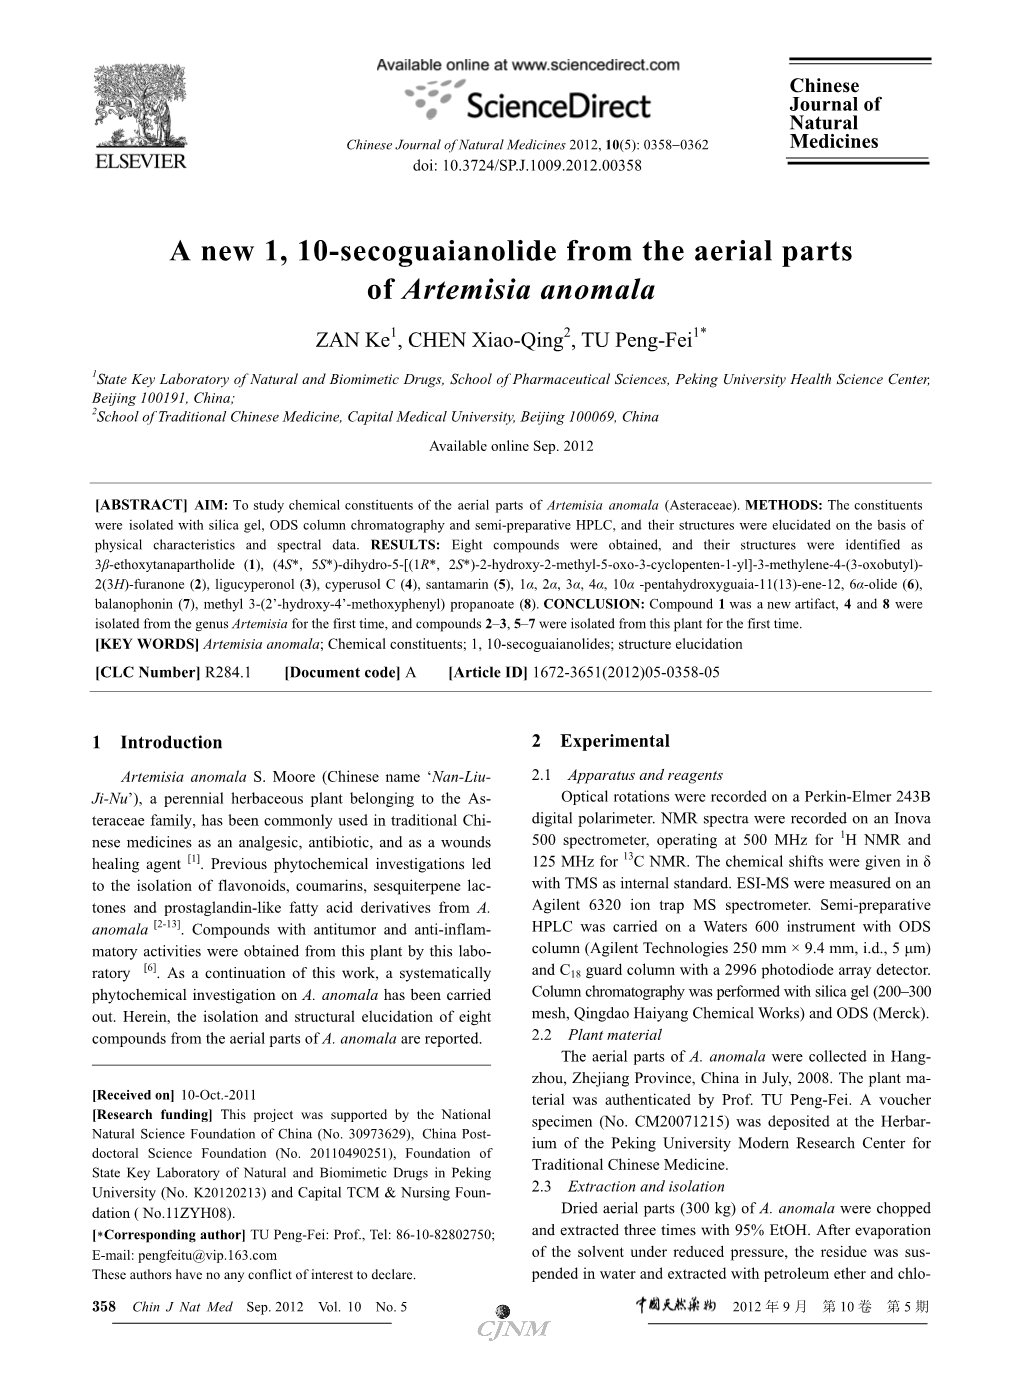 A New 1, 10-Secoguaianolide from the Aerial Parts of Artemisia Anomala